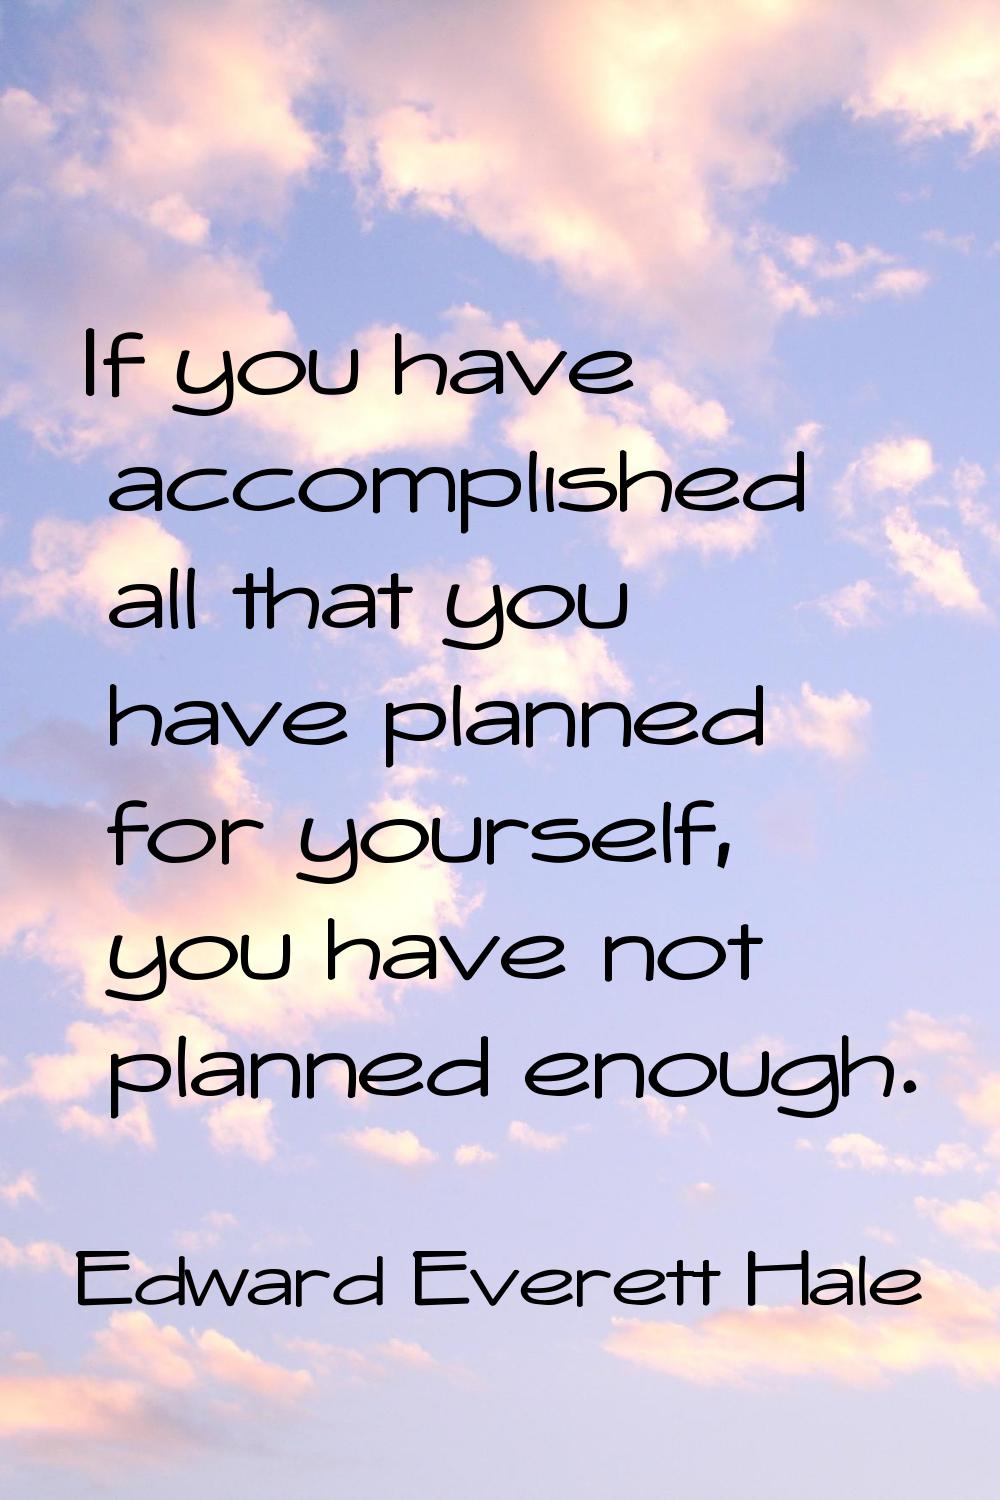 If you have accomplished all that you have planned for yourself, you have not planned enough.